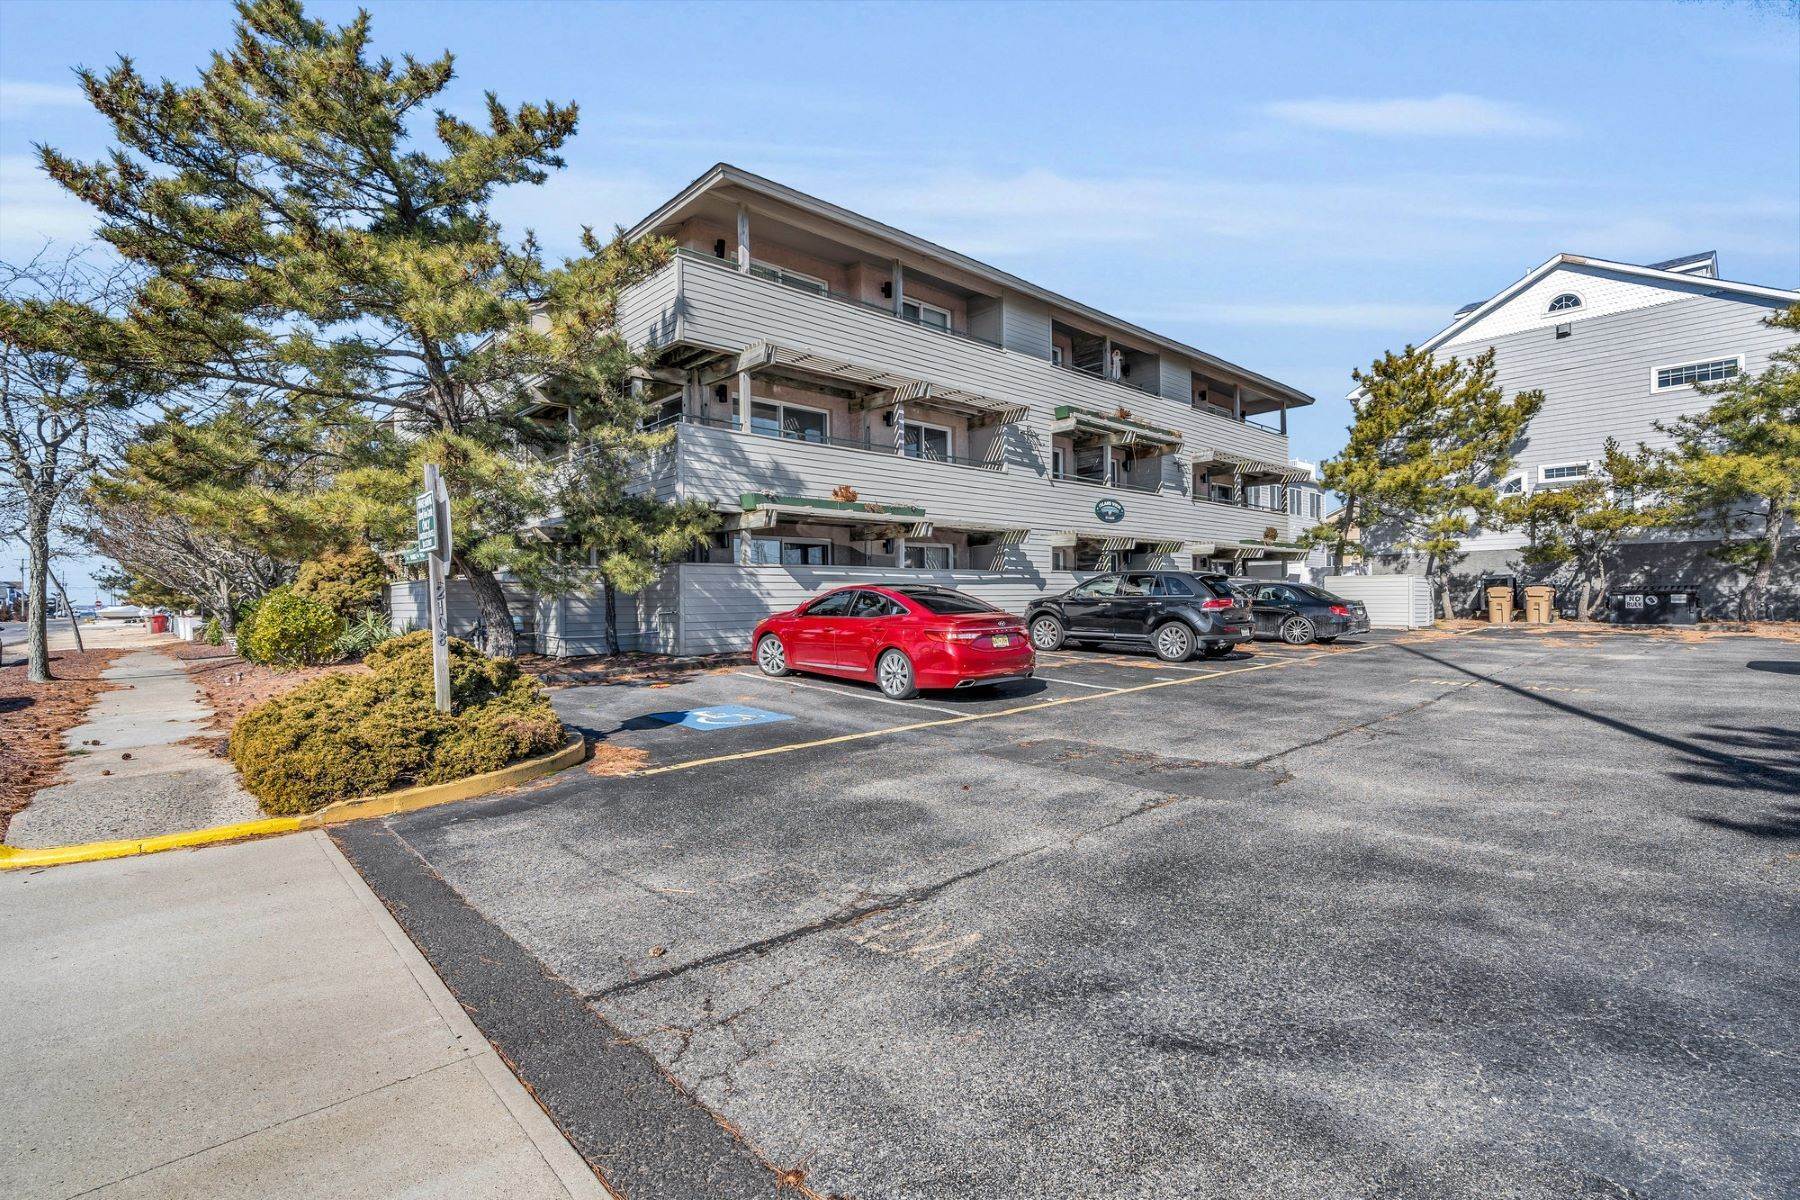 2. Condominiums for Sale at One Block to Beach 2108 Central Avenue 5 Seaside Park, New Jersey 08752 United States